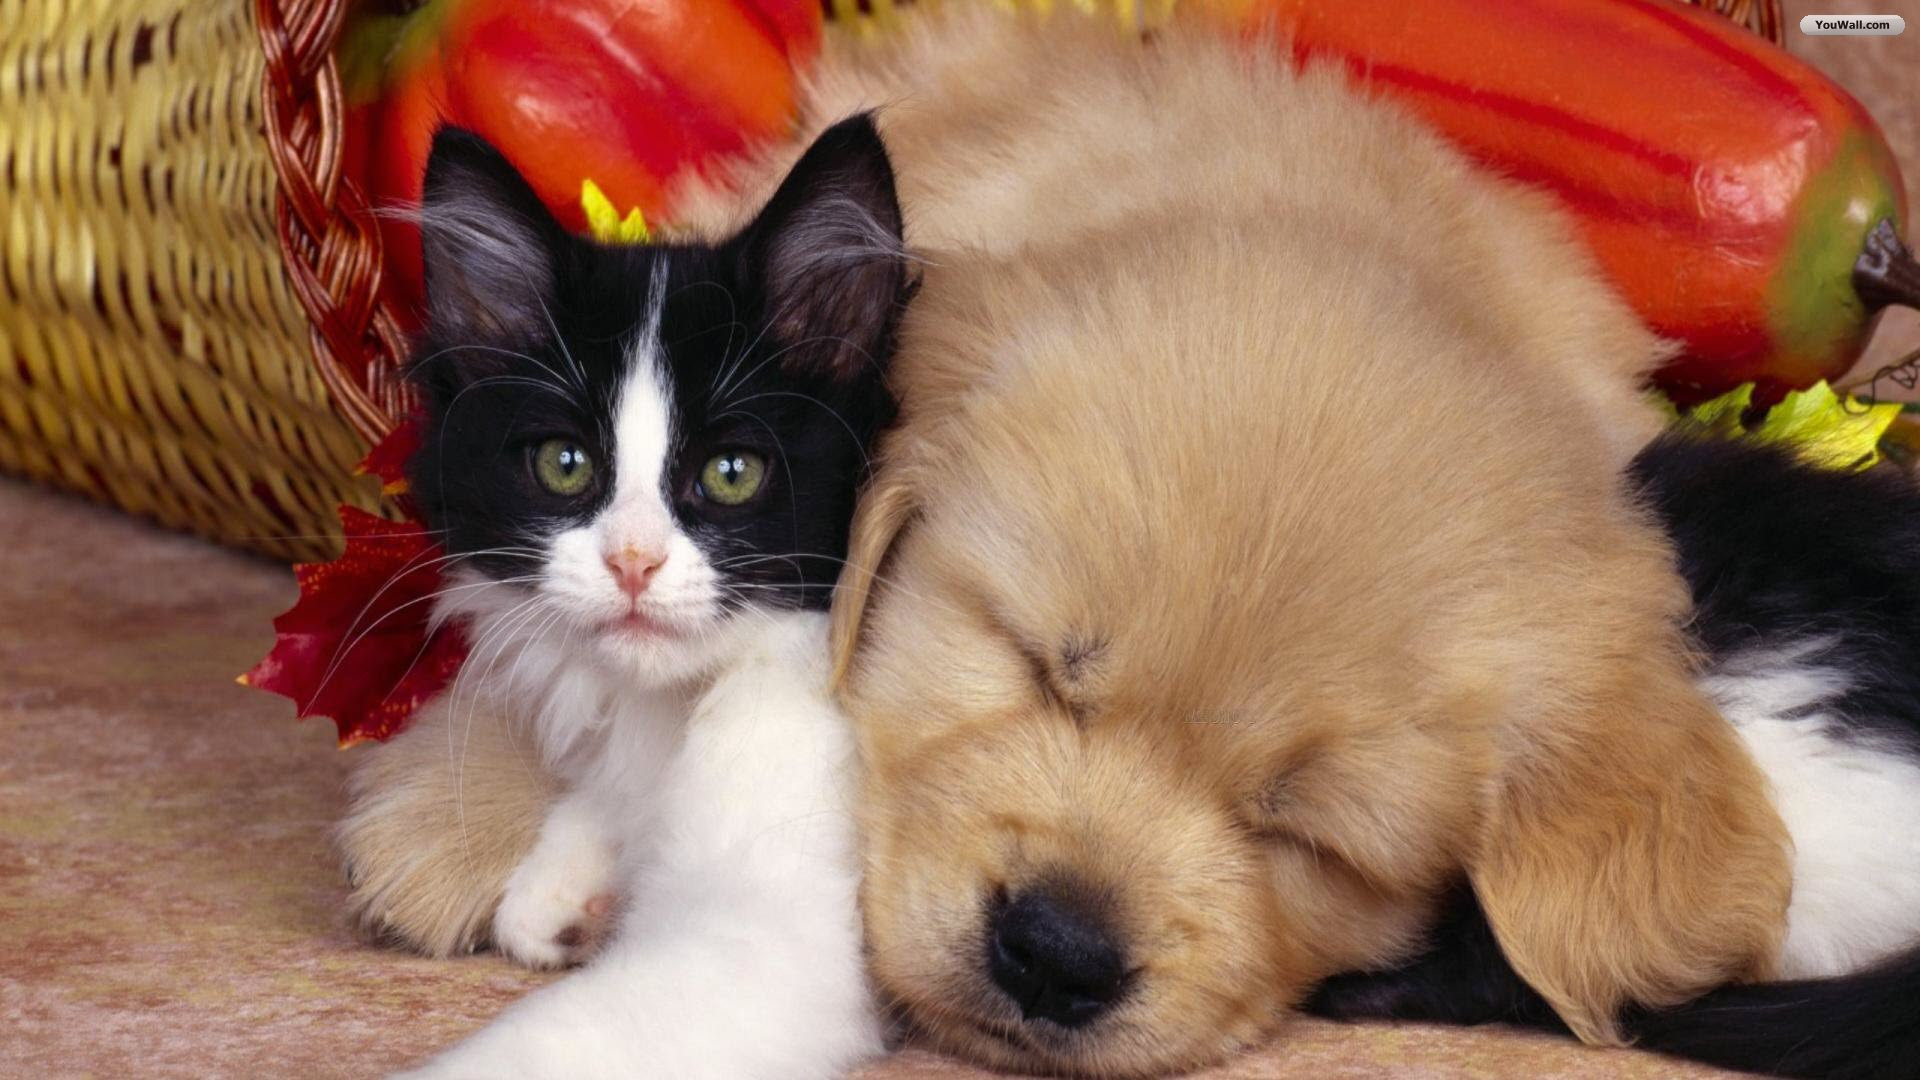 1920x1080 ... Wallpaper Of Cute Dogs And Cats Cute Dog And Cat Wallpaper | Pixelstalk  ...